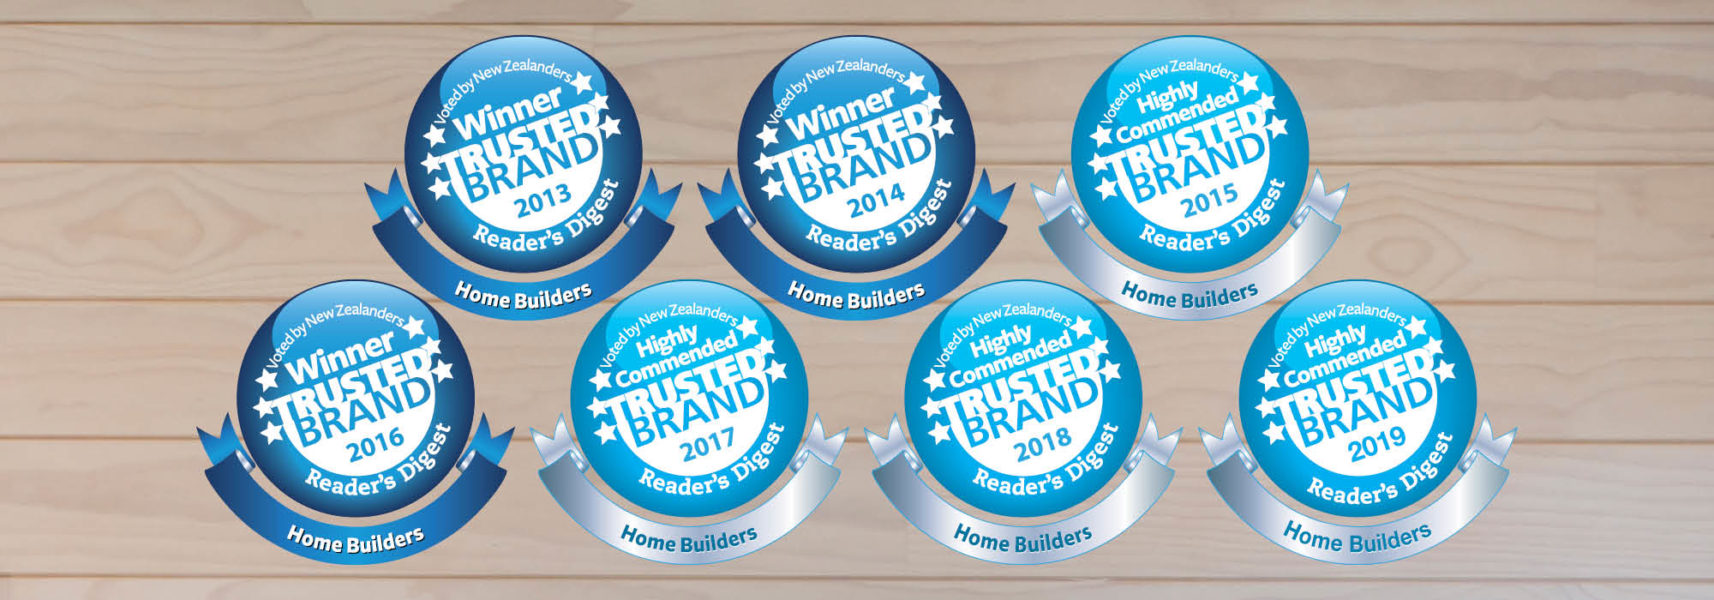 Most Trusted Brand Awards